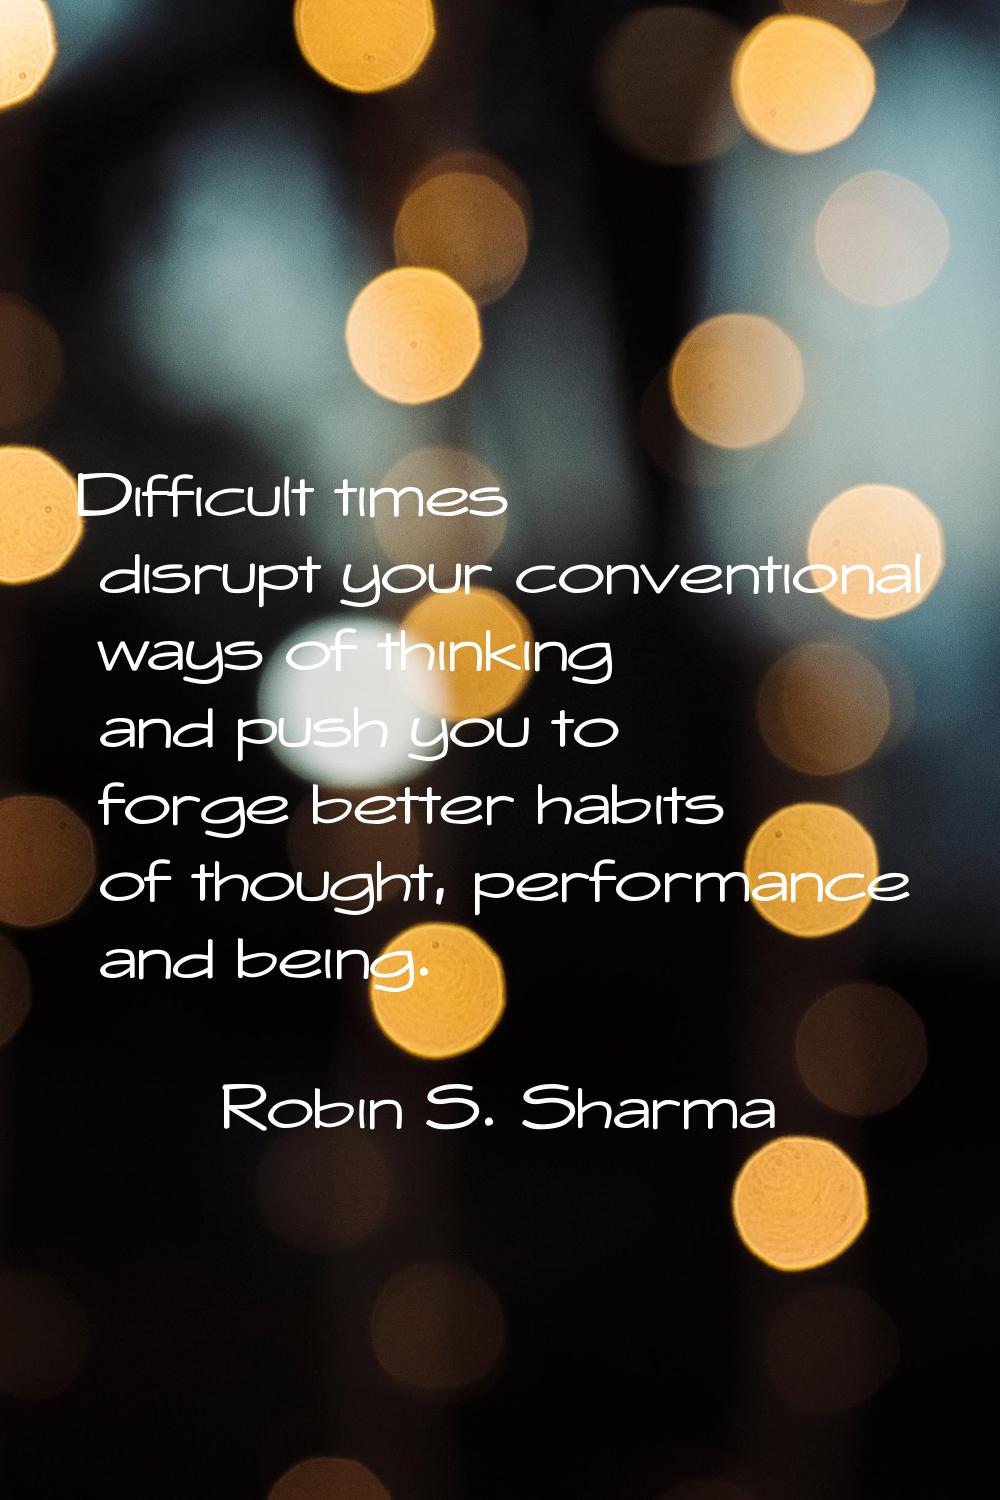 Difficult times disrupt your conventional ways of thinking and push you to forge better habits of t